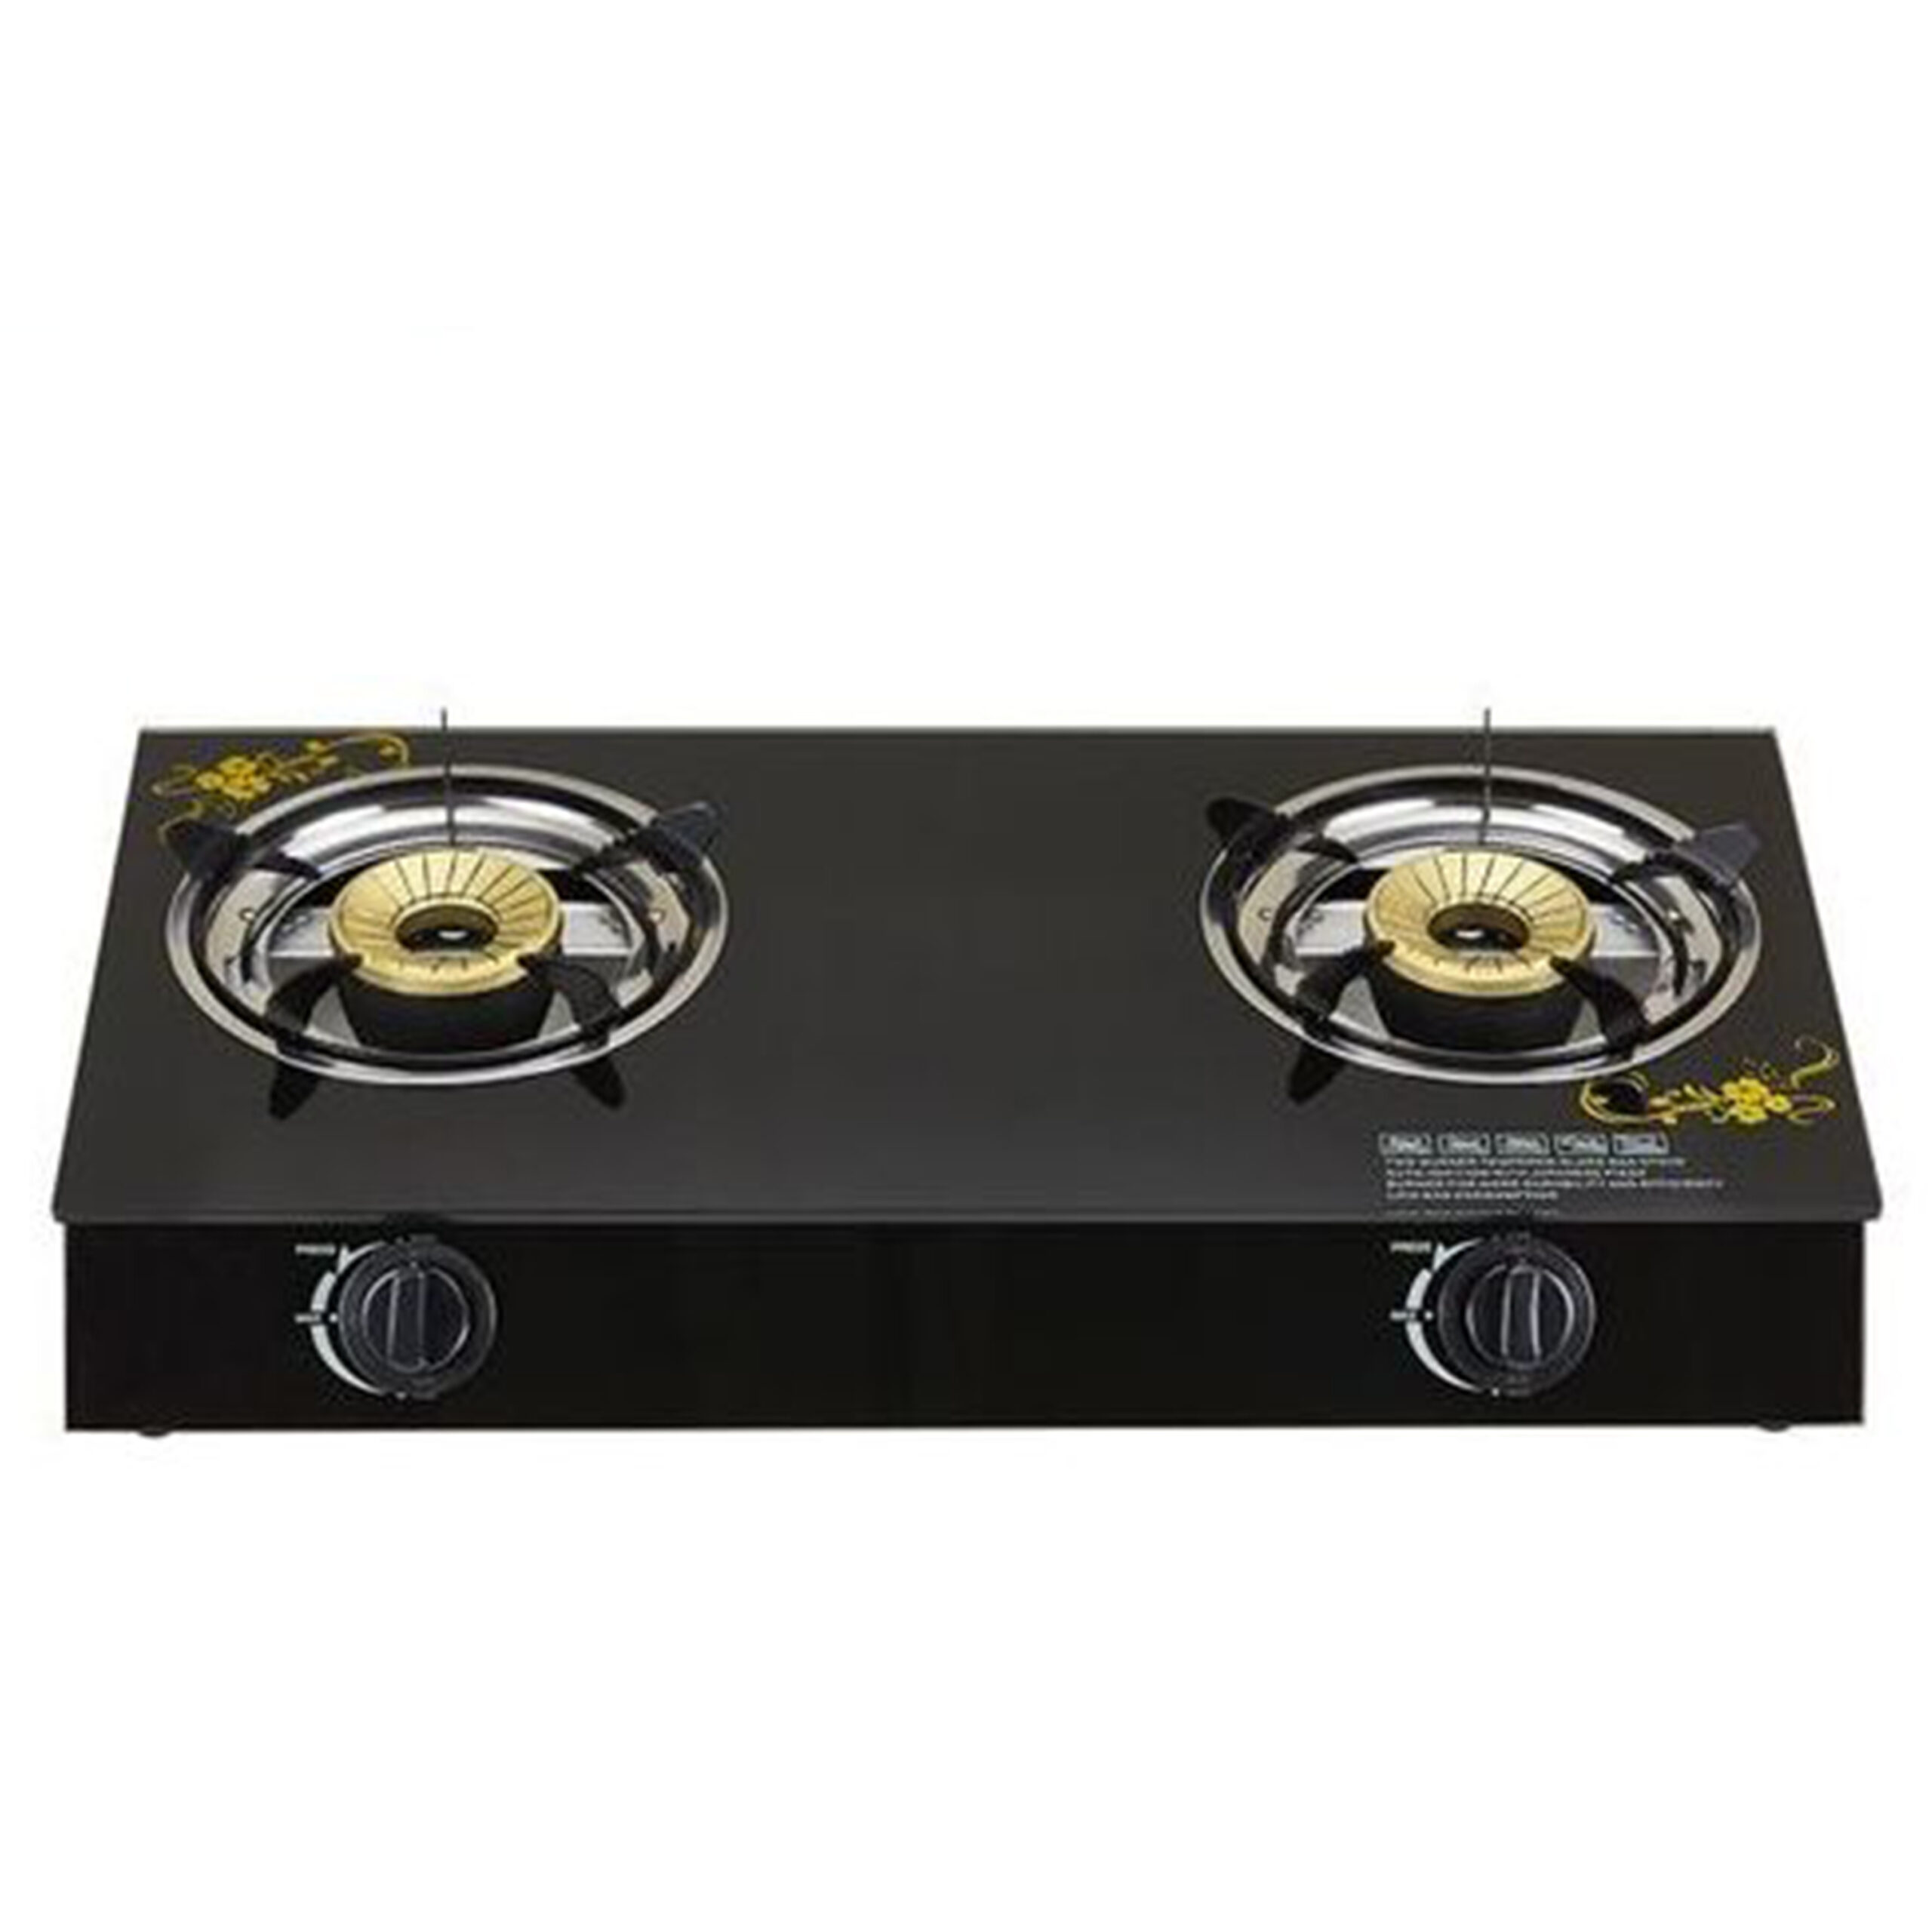 AILYONS GLASS
TOP DOUBLE
BURNER GAS
STOVE 385w x 705l
x 95h